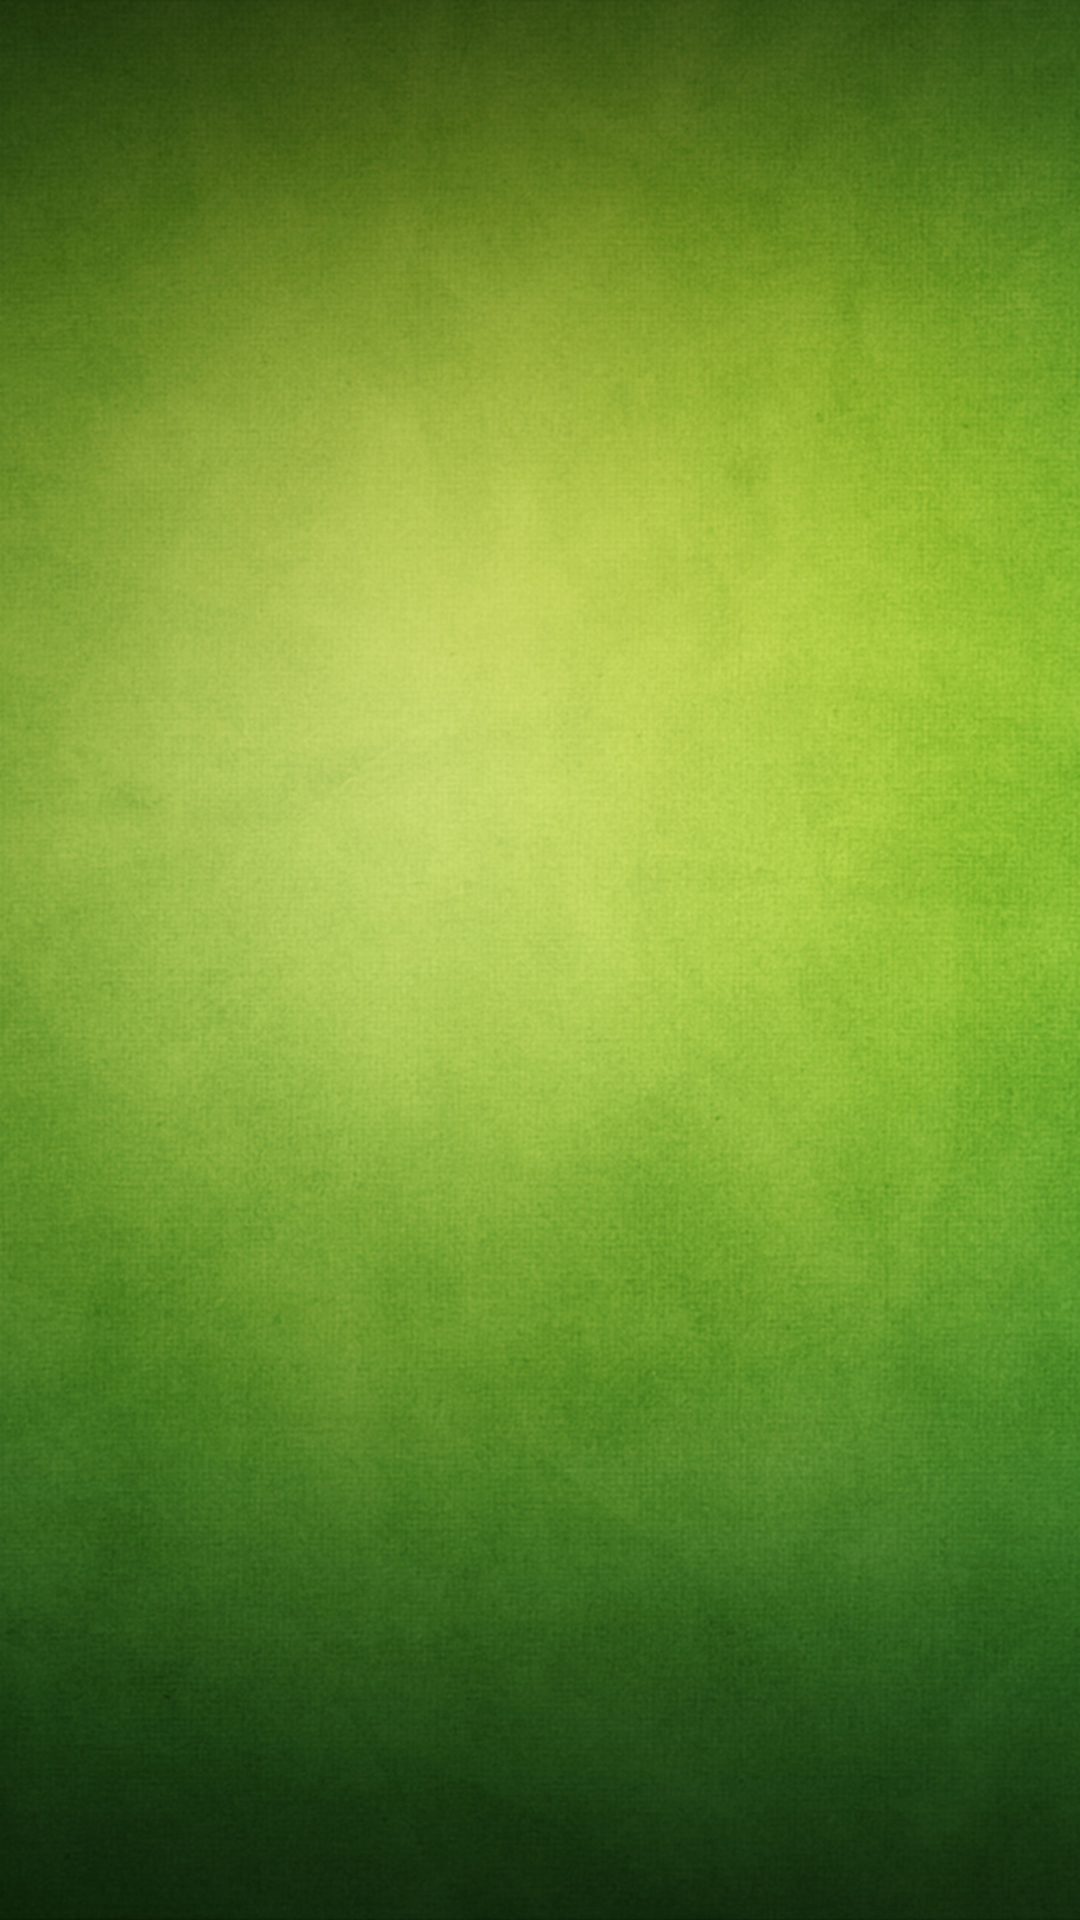 Pure Minimal Simple Green Background Iphone 7 Wallpaper , HD Wallpaper & Backgrounds